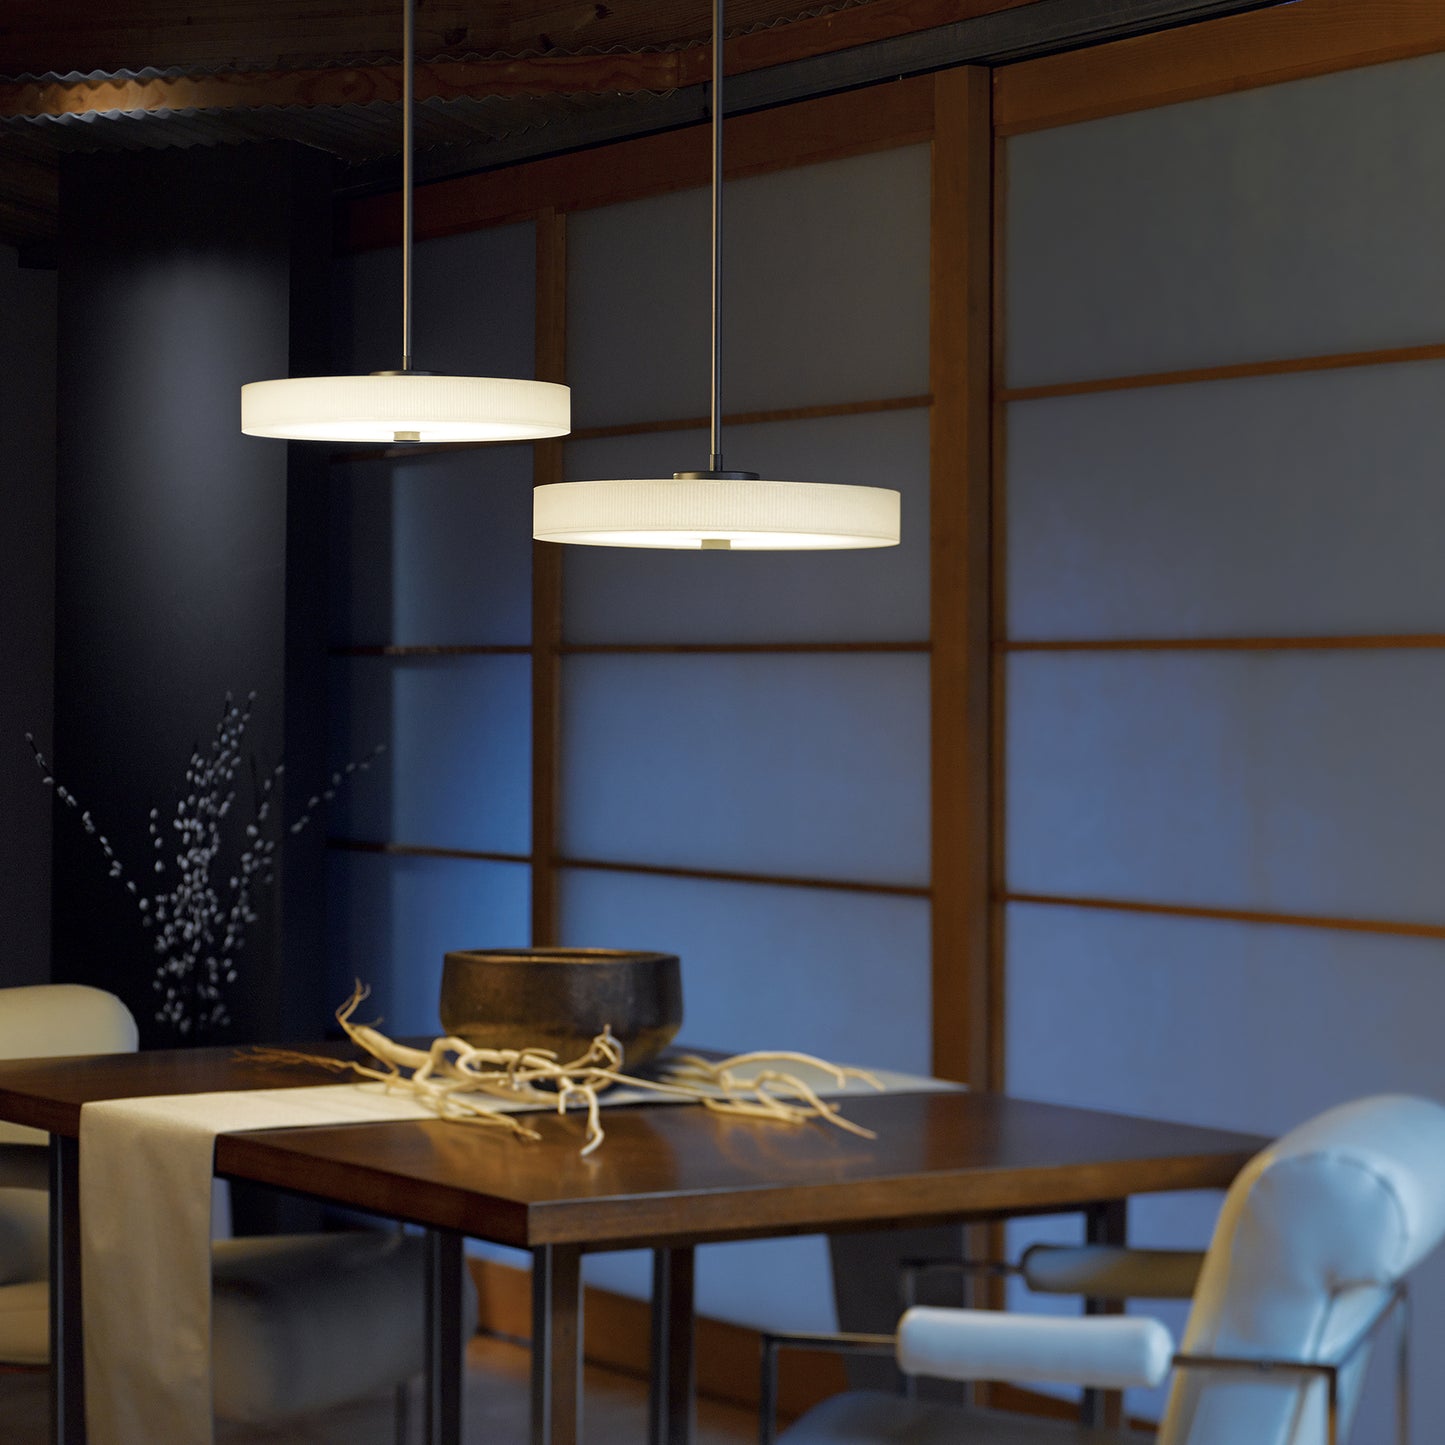 A dimmable LED light source illuminates a dining room with a table and chairs, complemented by the elegant Hubbardton Forge Disq Pendant and Hubbardton Forge pendant.